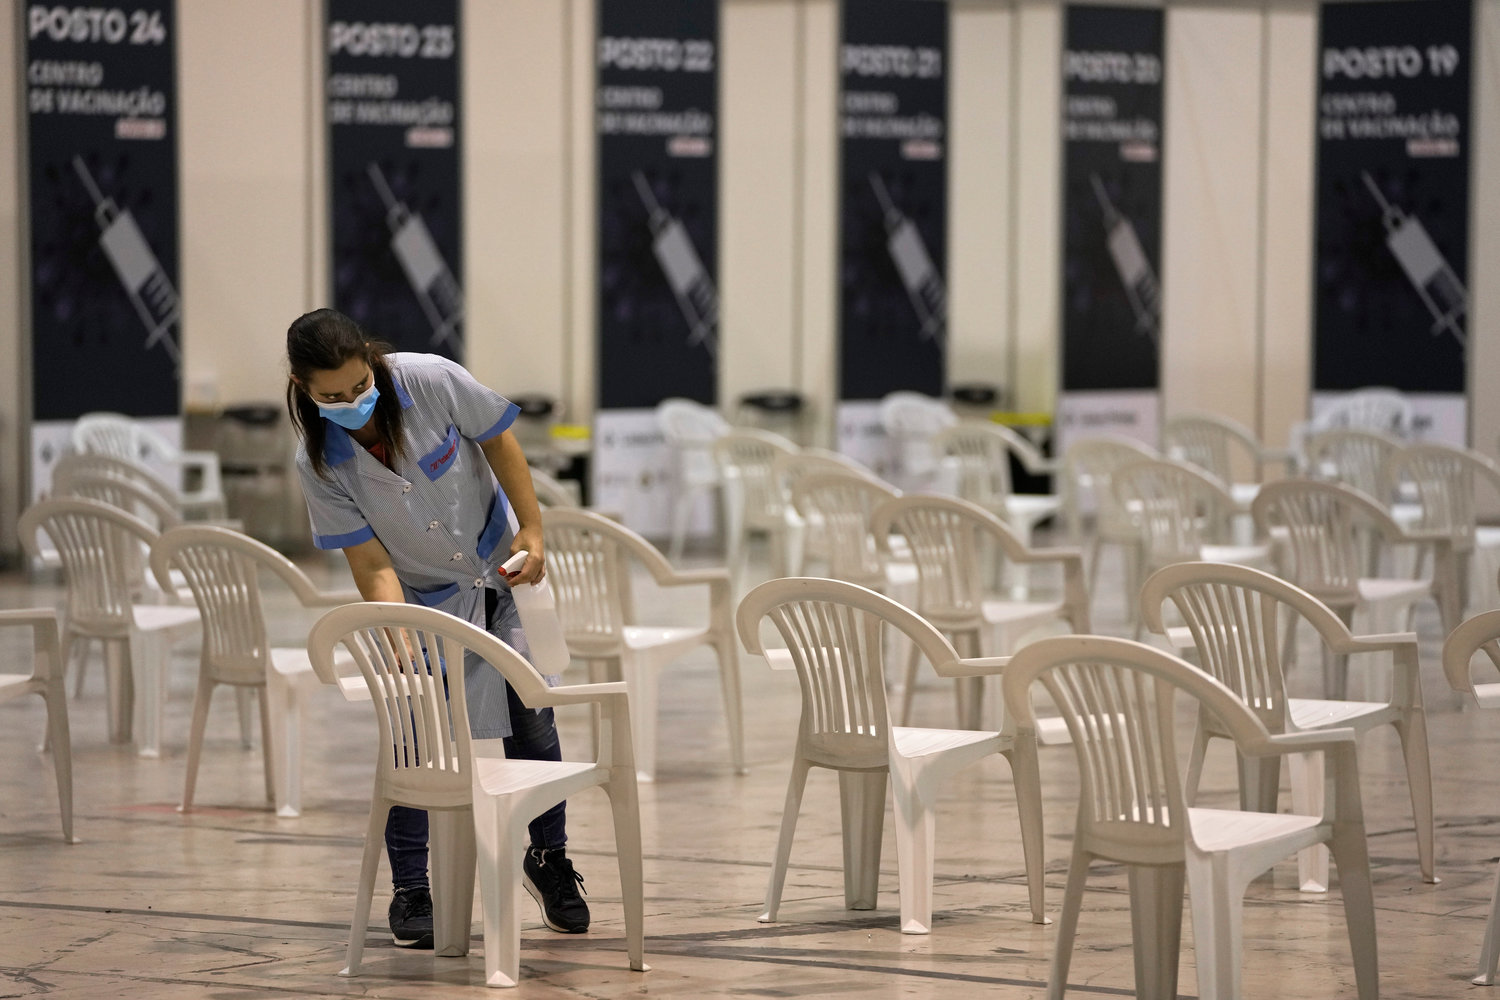 VACCINATION CENTER — A worker arranges chairs at a new vaccination center in Lisbon, Portugal, on Tuesday. Portuguese health authorities on Monday identified 13 cases of the omicron coronavirus variant among members of a top soccer club and were investigating whether it was one of the first reported cases of local transmission of the virus outside of southern Africa.